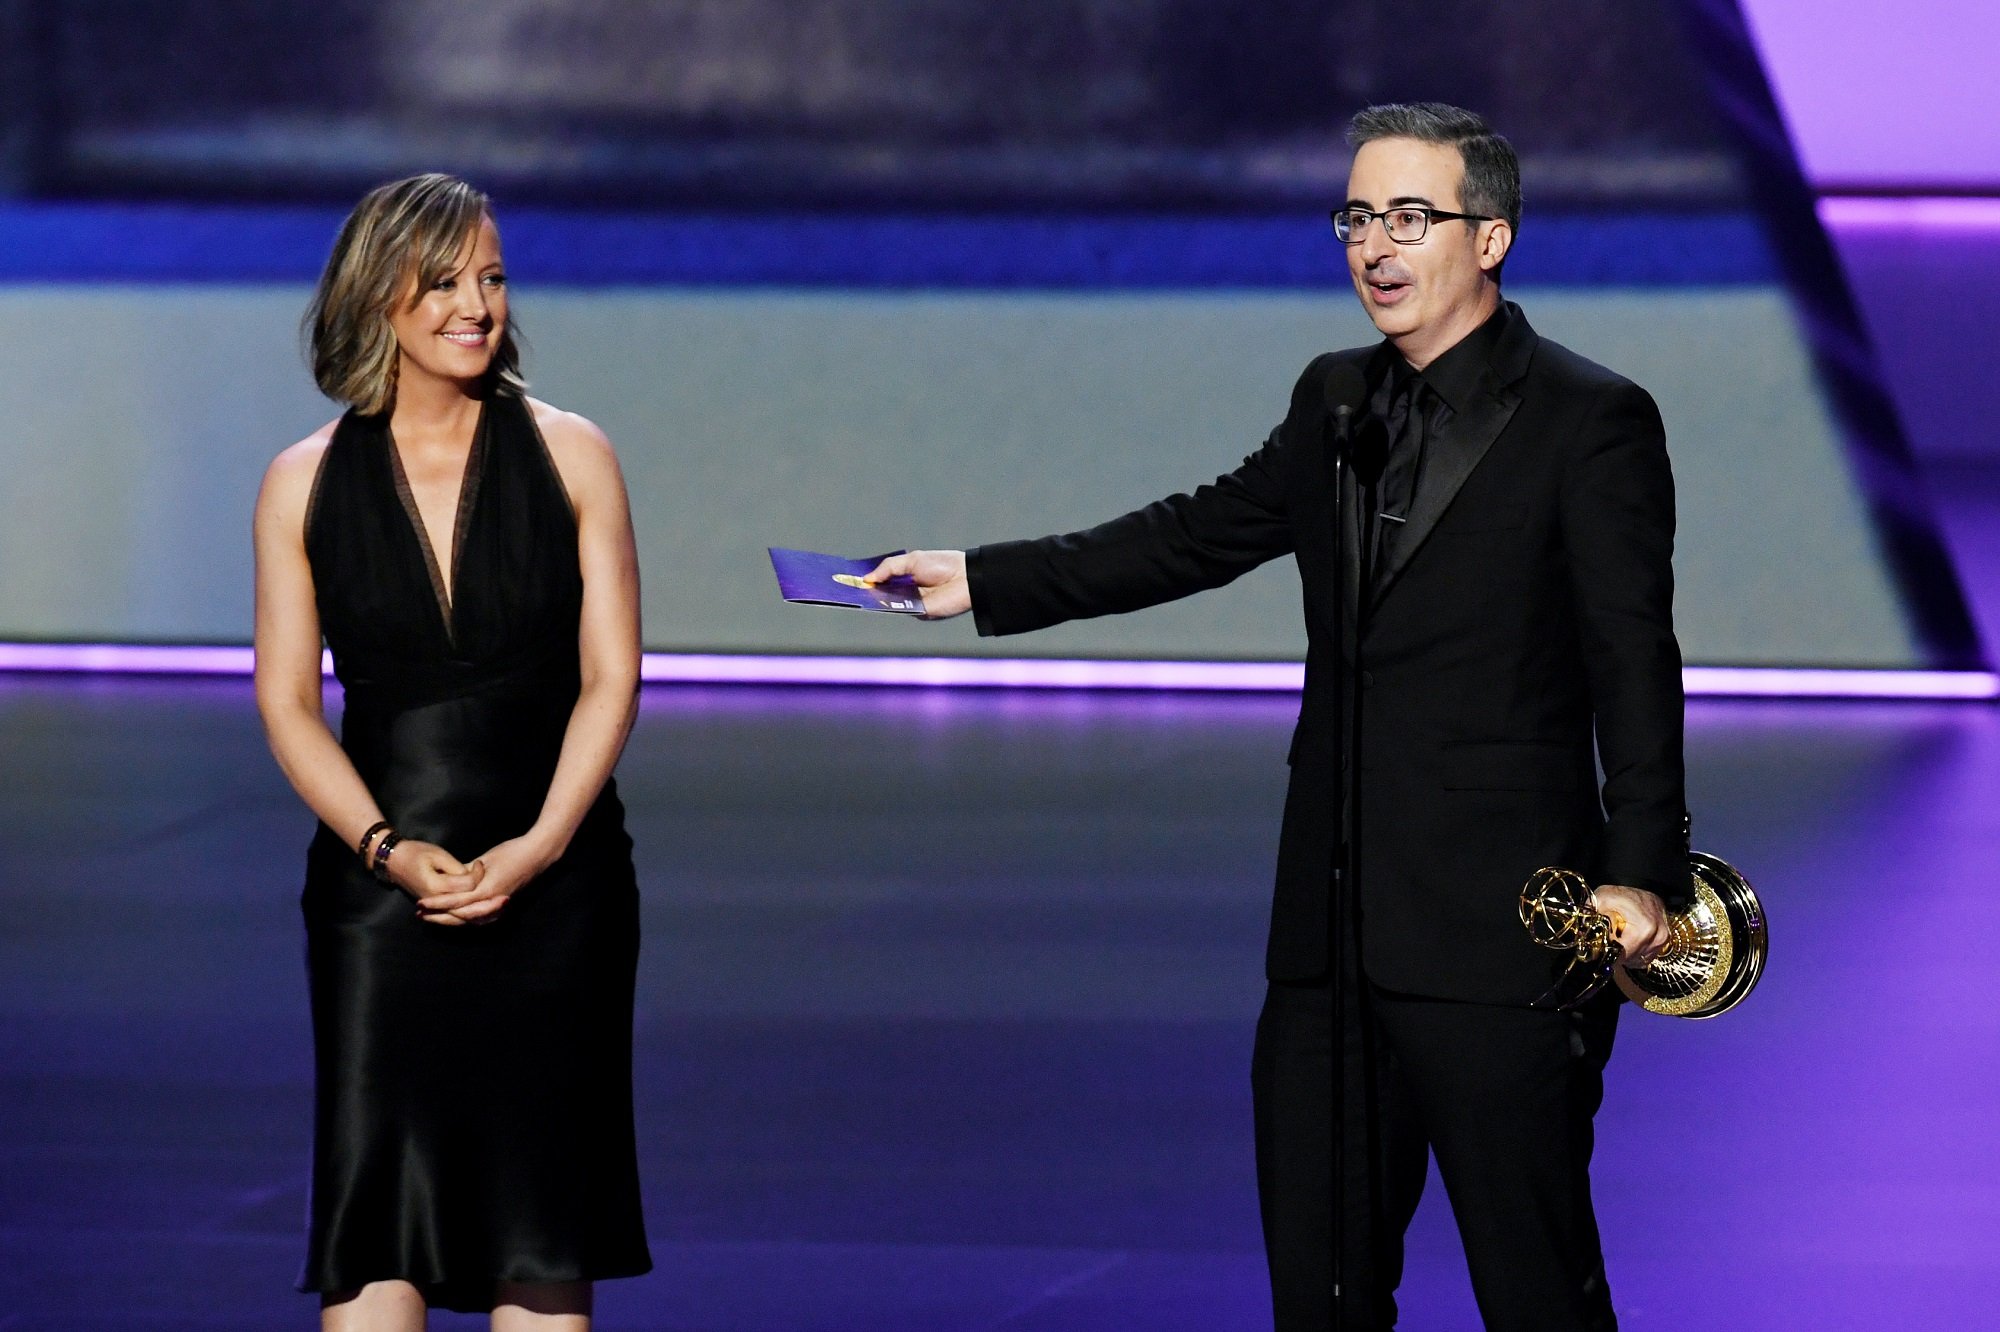 2021 Emmy predictions Last Week Tonight with John Oliver, whose host is pictured here in a black tuxedo at last year's Emmy Awards